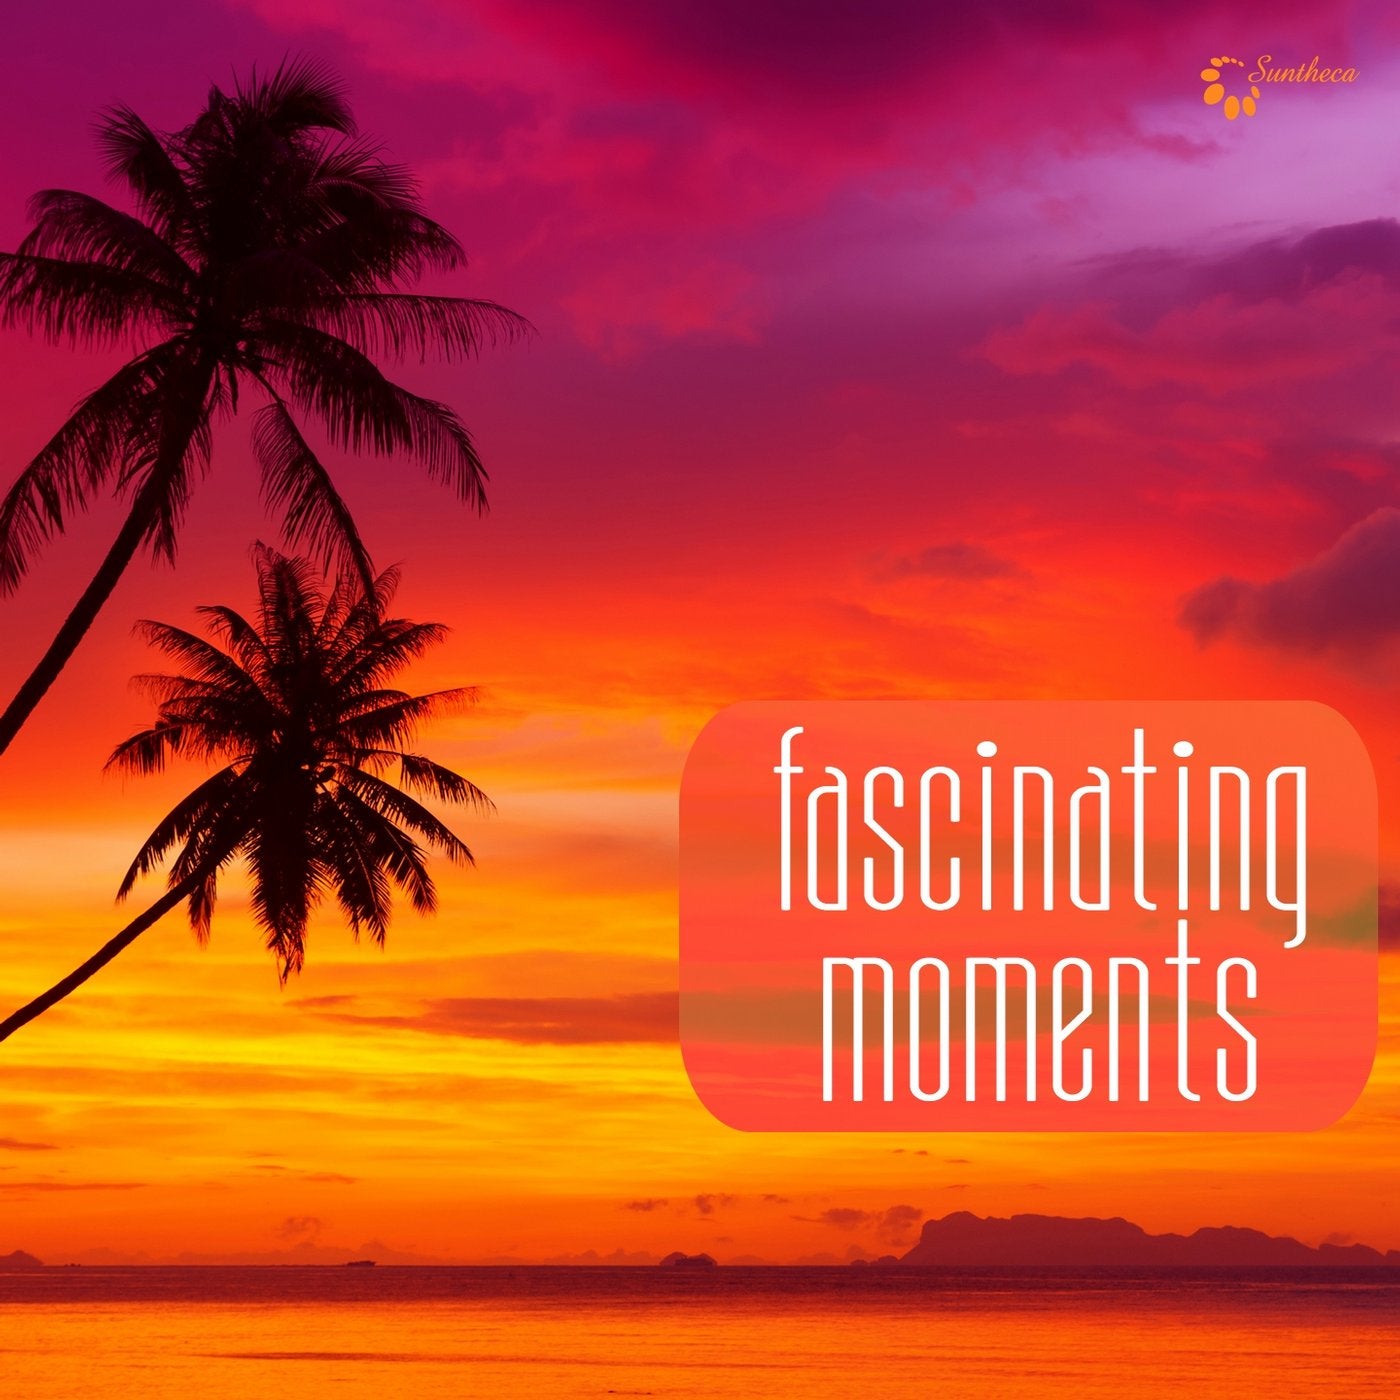 Fascinating Moments